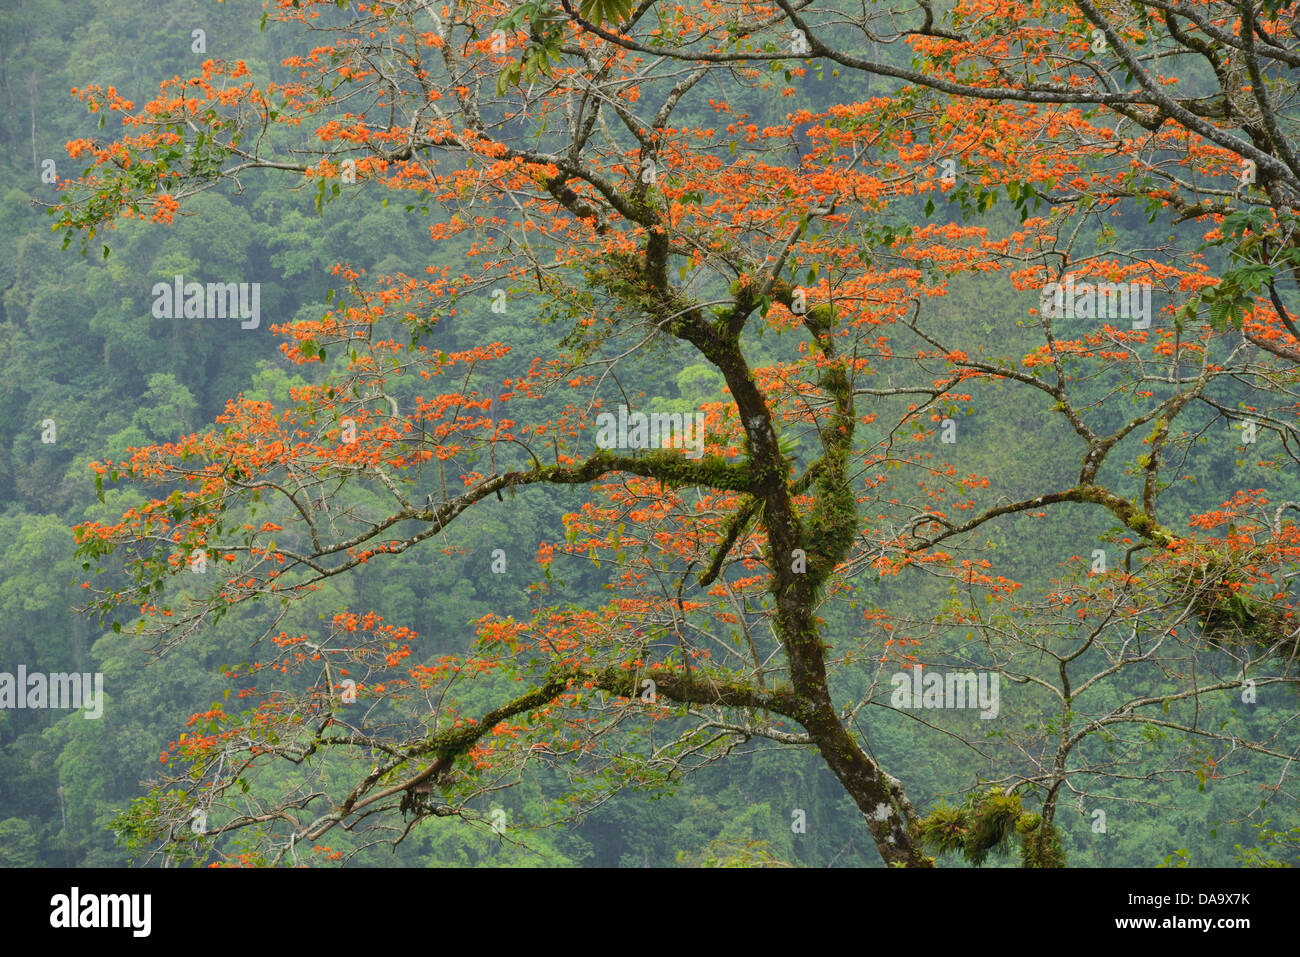 Central America, Costa Rica, landscape, green, coral tree, red flowers, blooming, tropical, Alajuela, Stock Photo